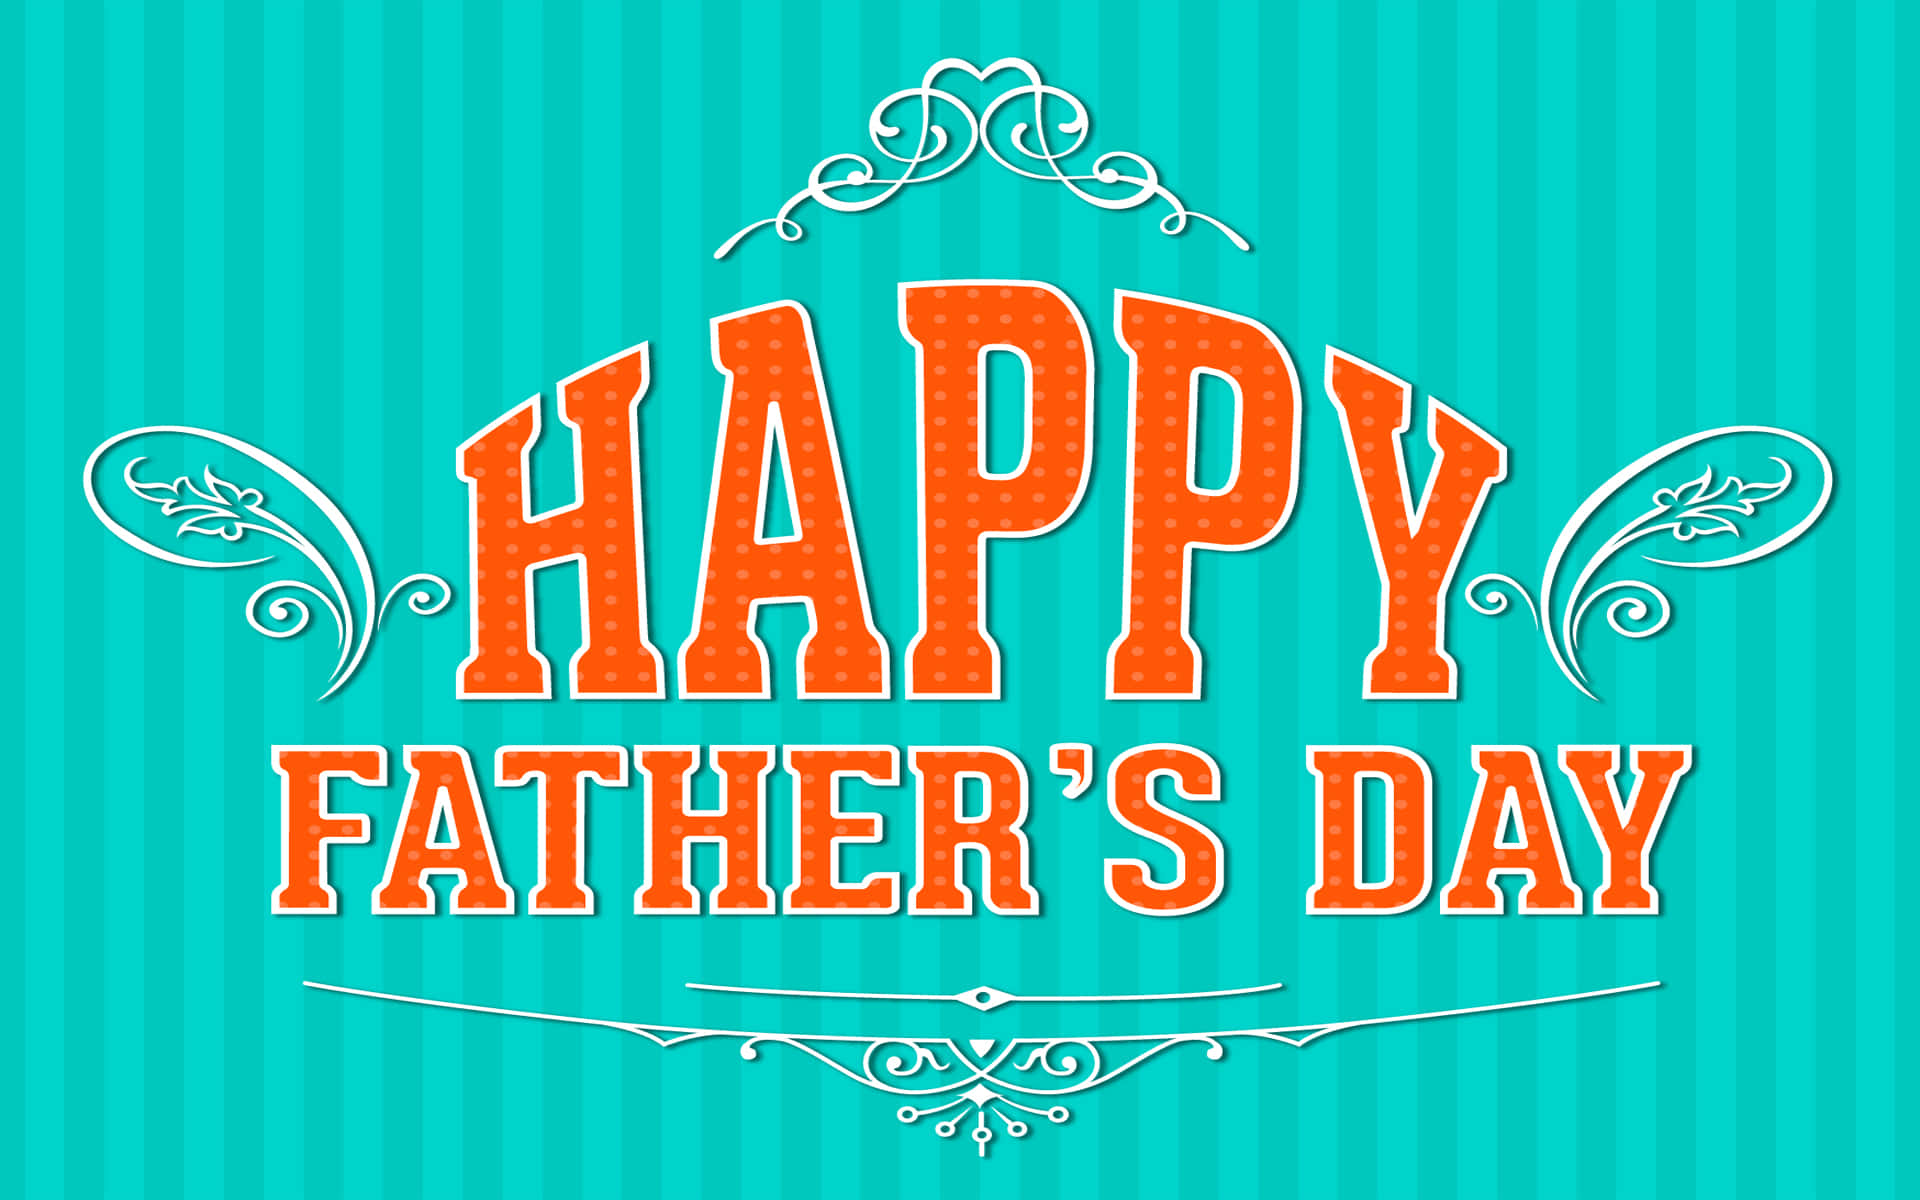 Enjoy Father's Day with your loved ones